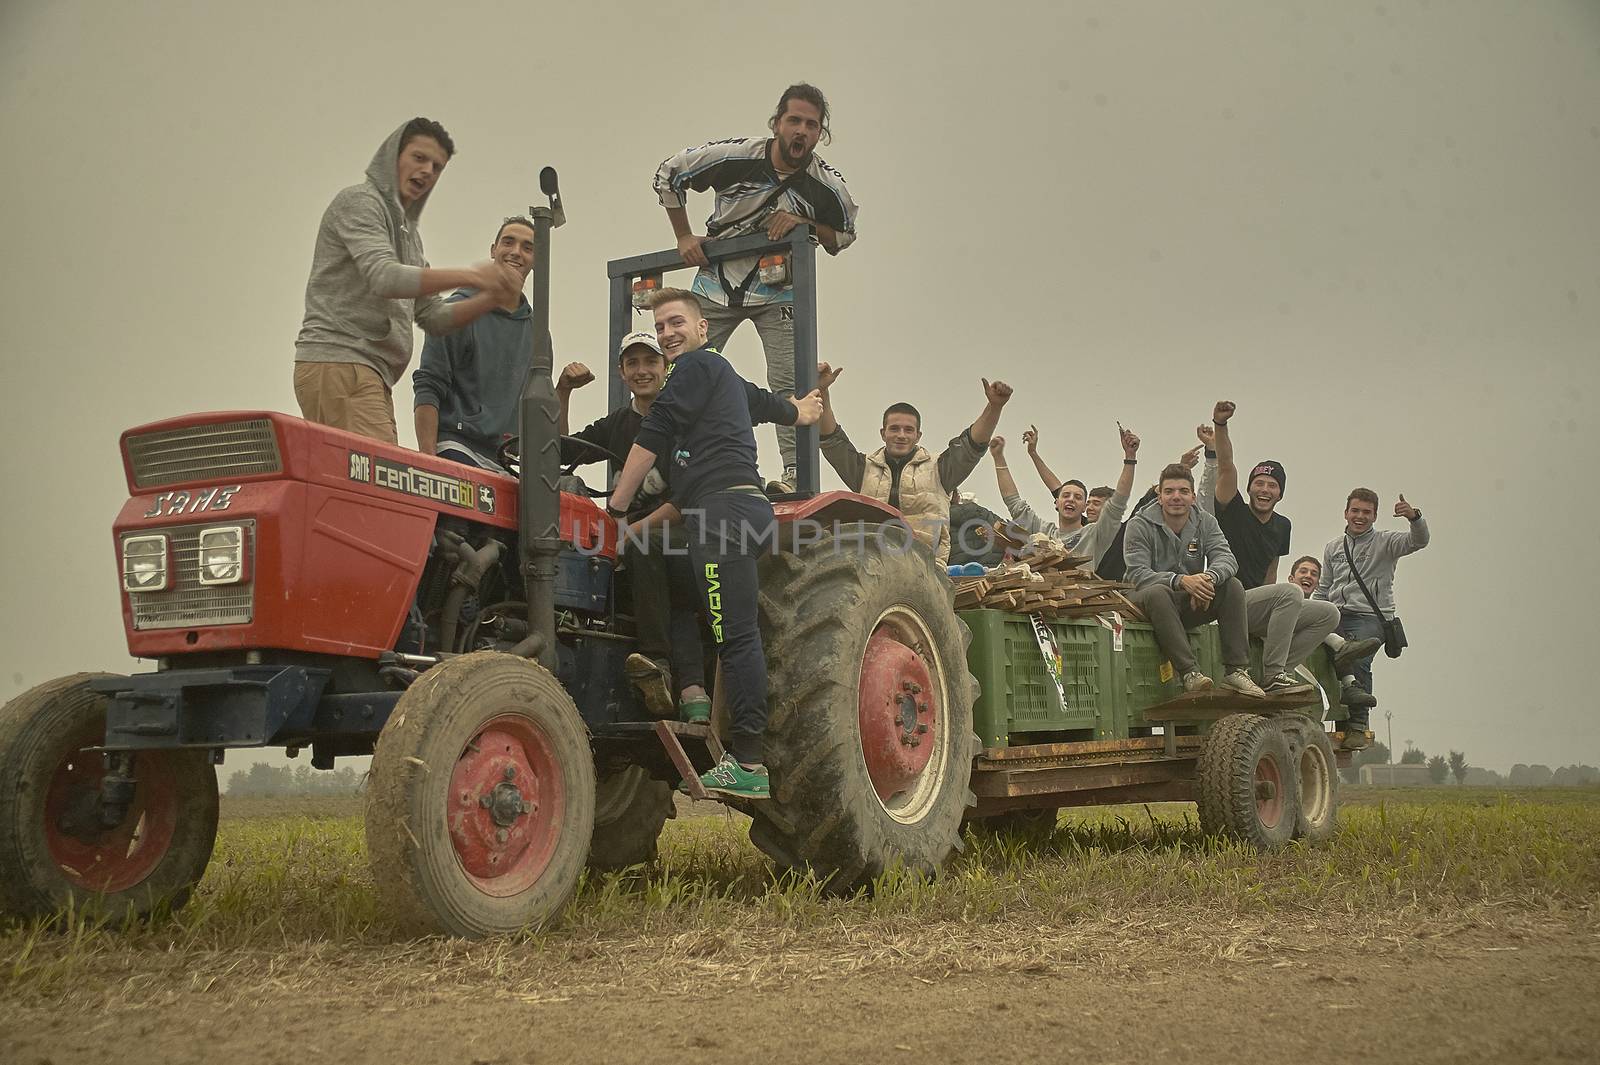 GAVELLO, ITALY 24 MARCH 2020: Farmers on the tractor in countryside